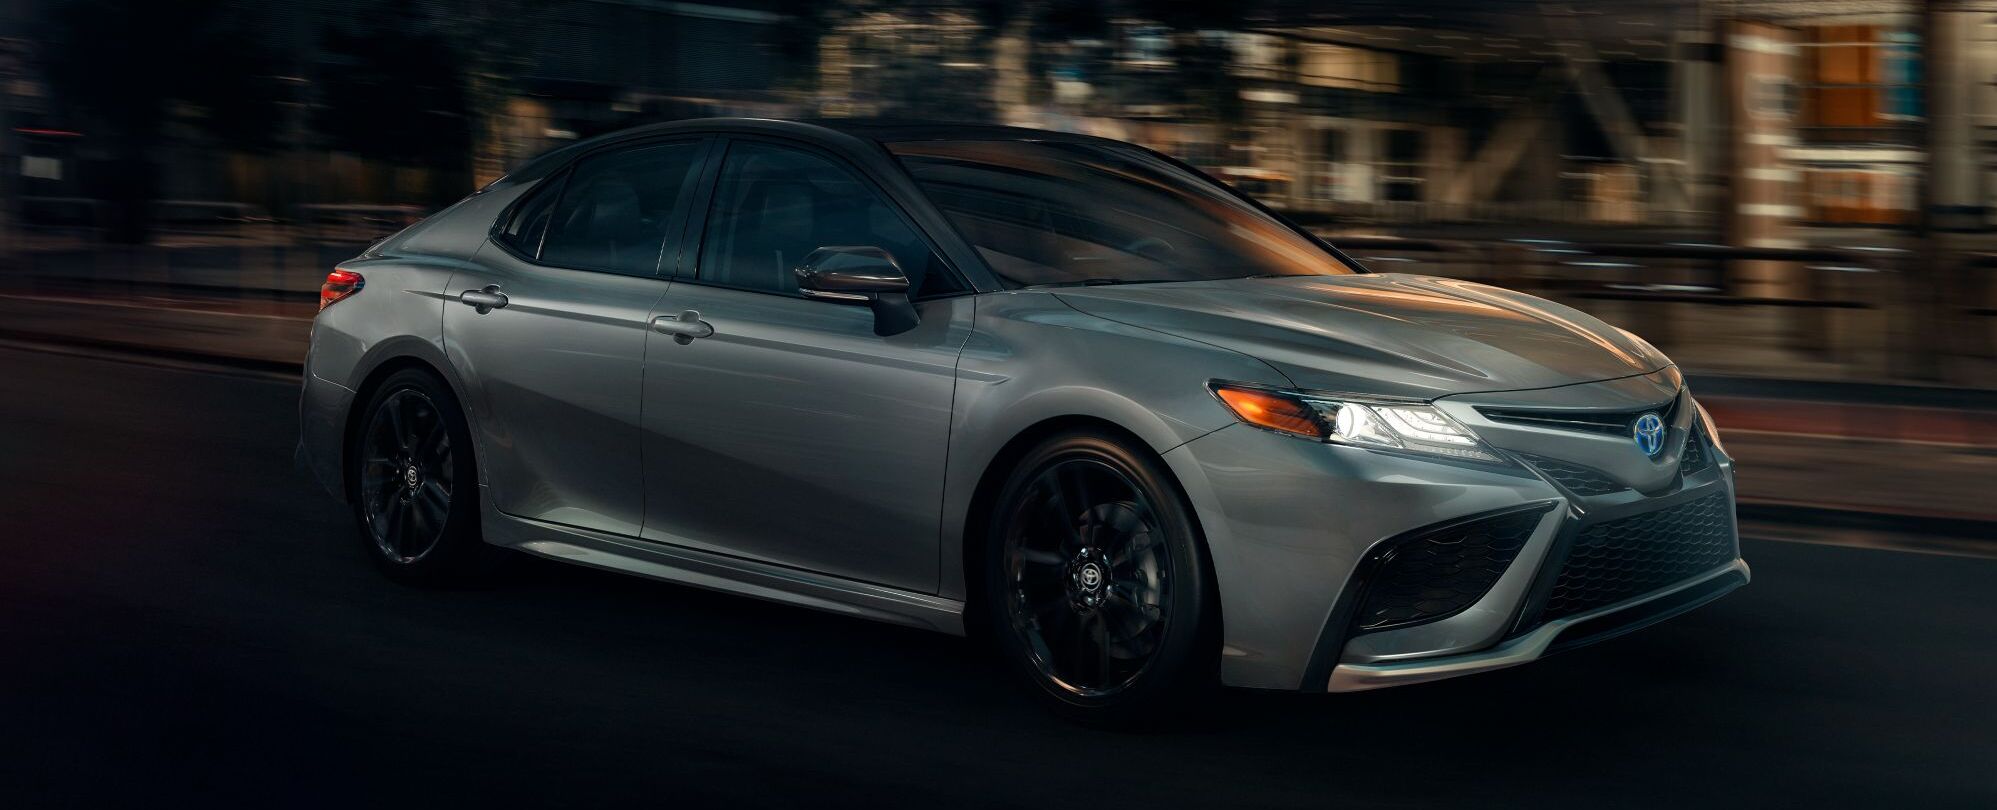 2022 Toyota Camry Hybrid Lease near Independence, MO, 64055